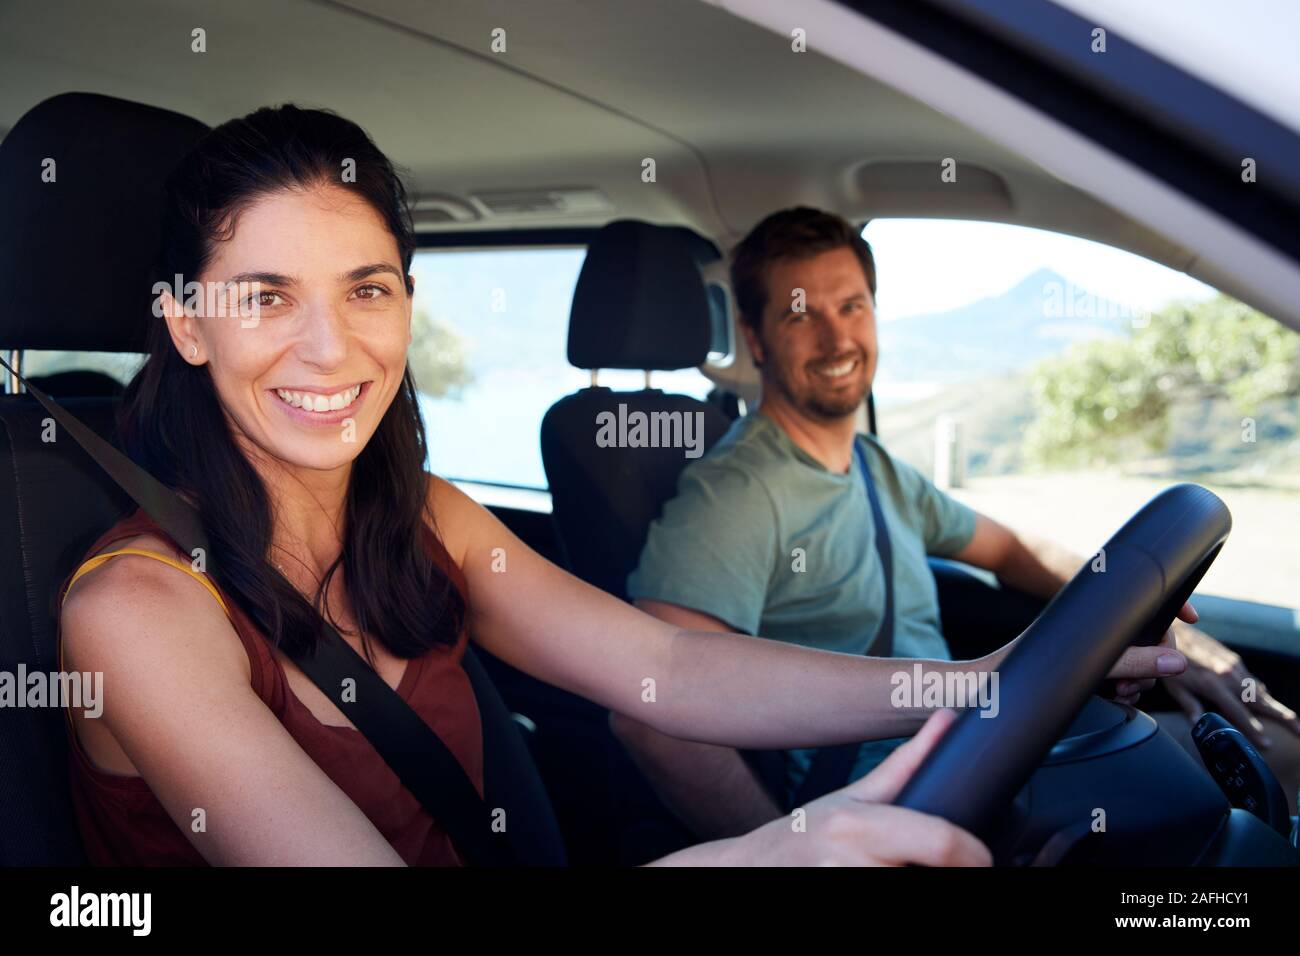 Mid adult white woman driving car, her husband in front passenger seat, smiling to camera, side view Stock Photo